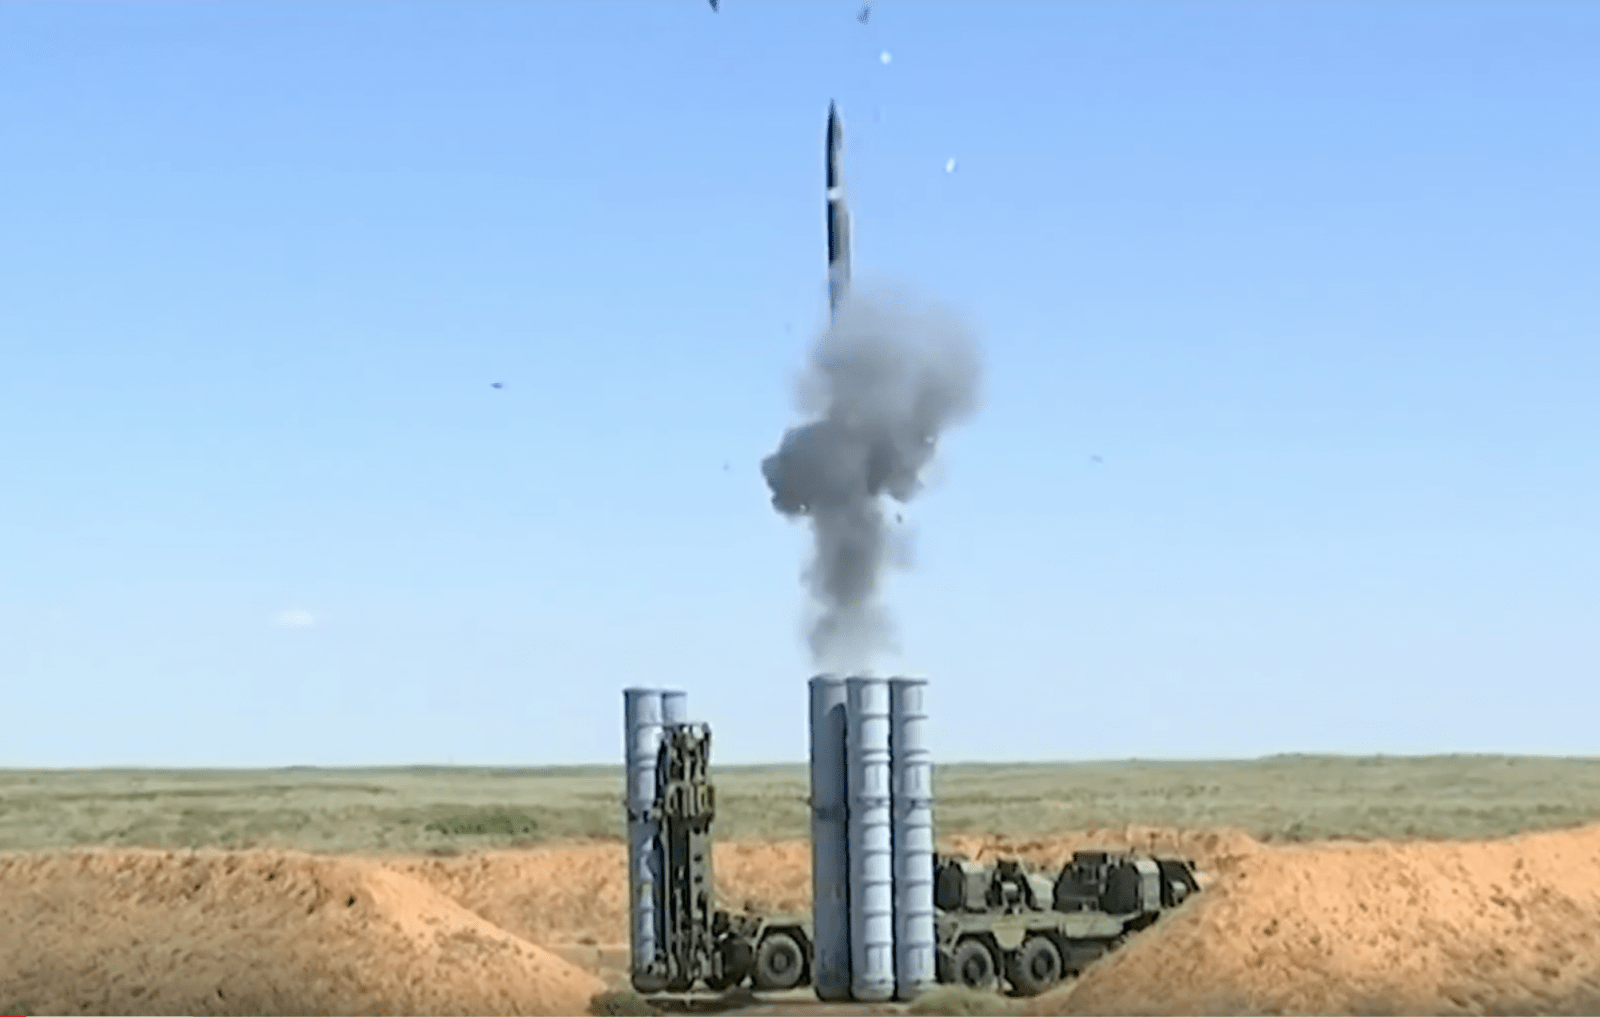 India’s Acquisition of S-400 Air Defence System: Implications For the PAF